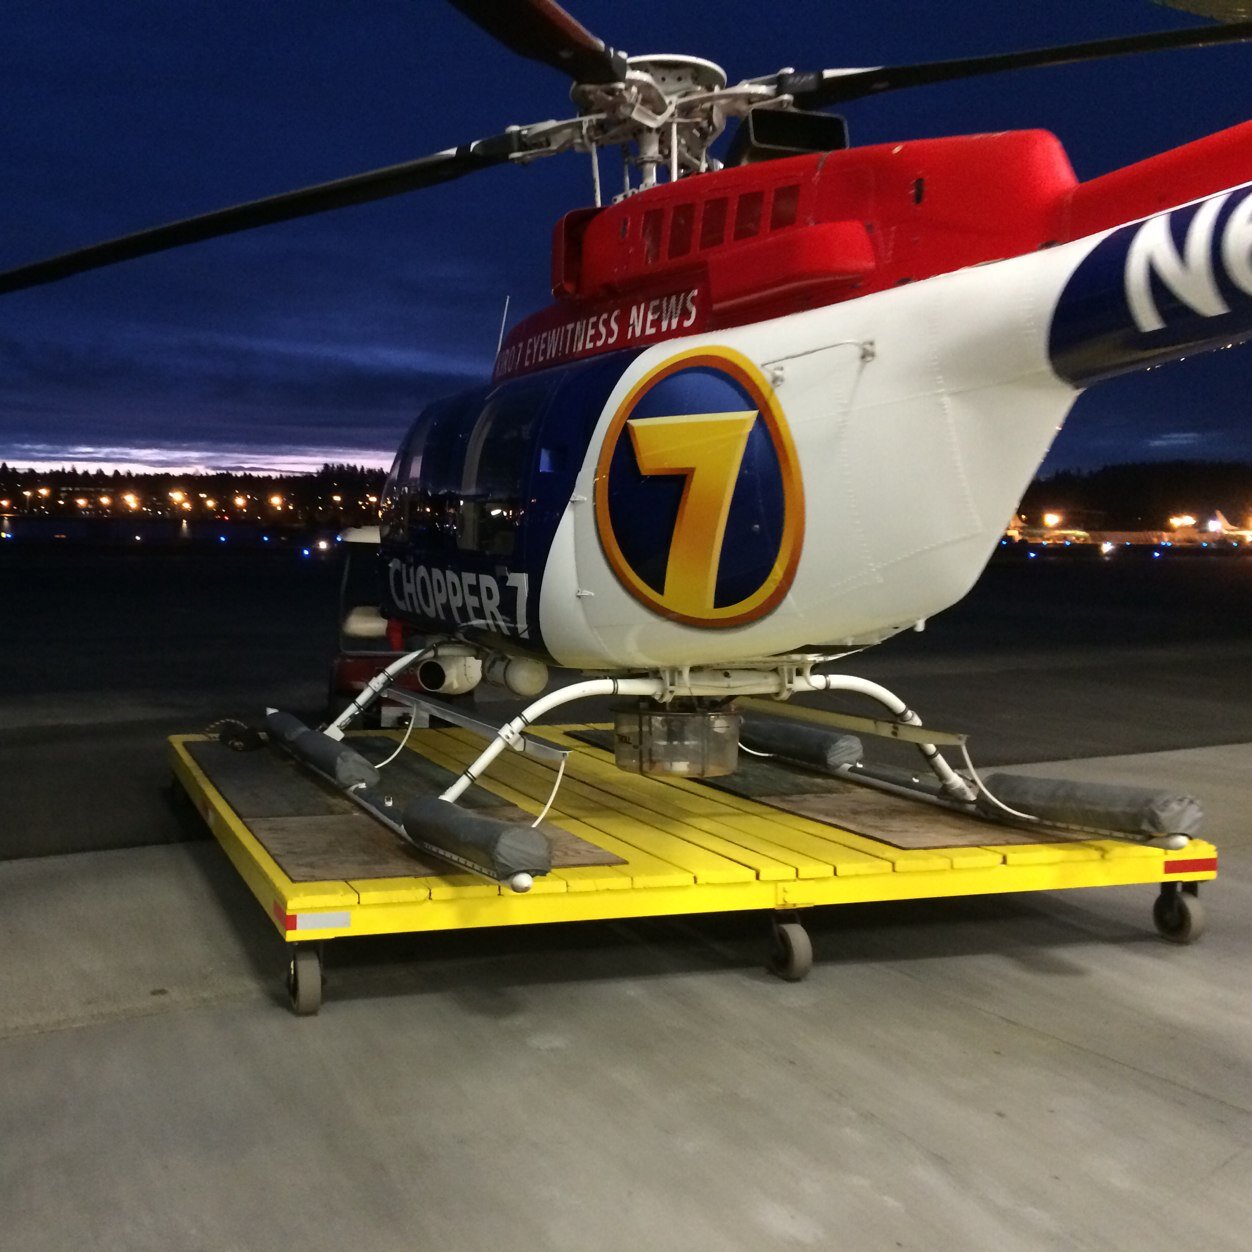 Covering News in the Pacific Northwest for over 35 Years as @KIRO7Seattle's eye in the sky